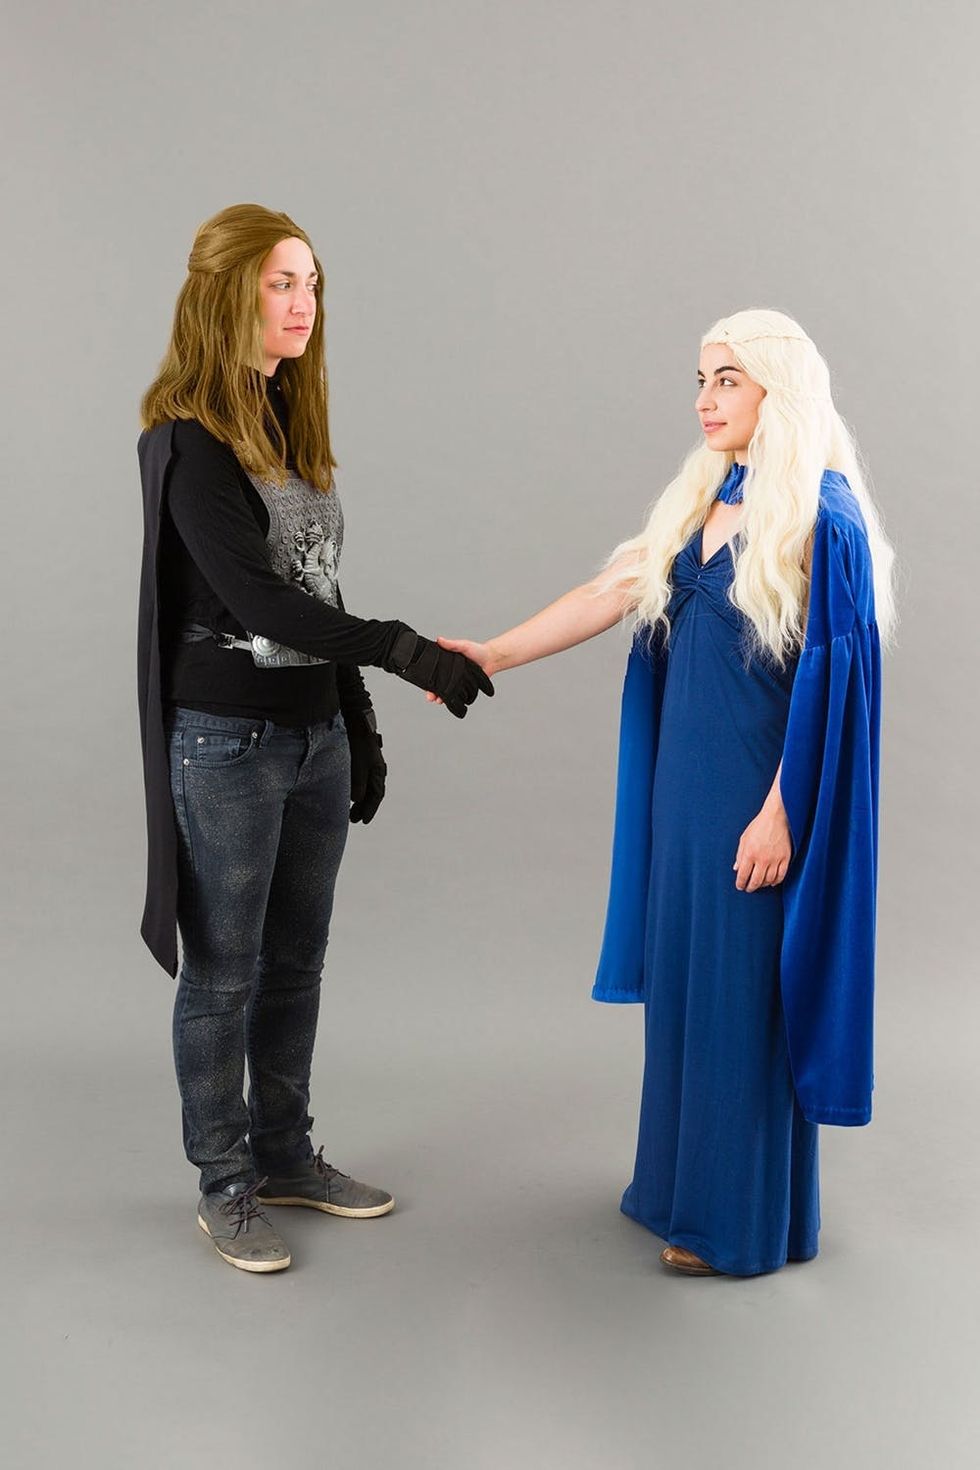 Daenerys and Yara from Game of Thrones costume